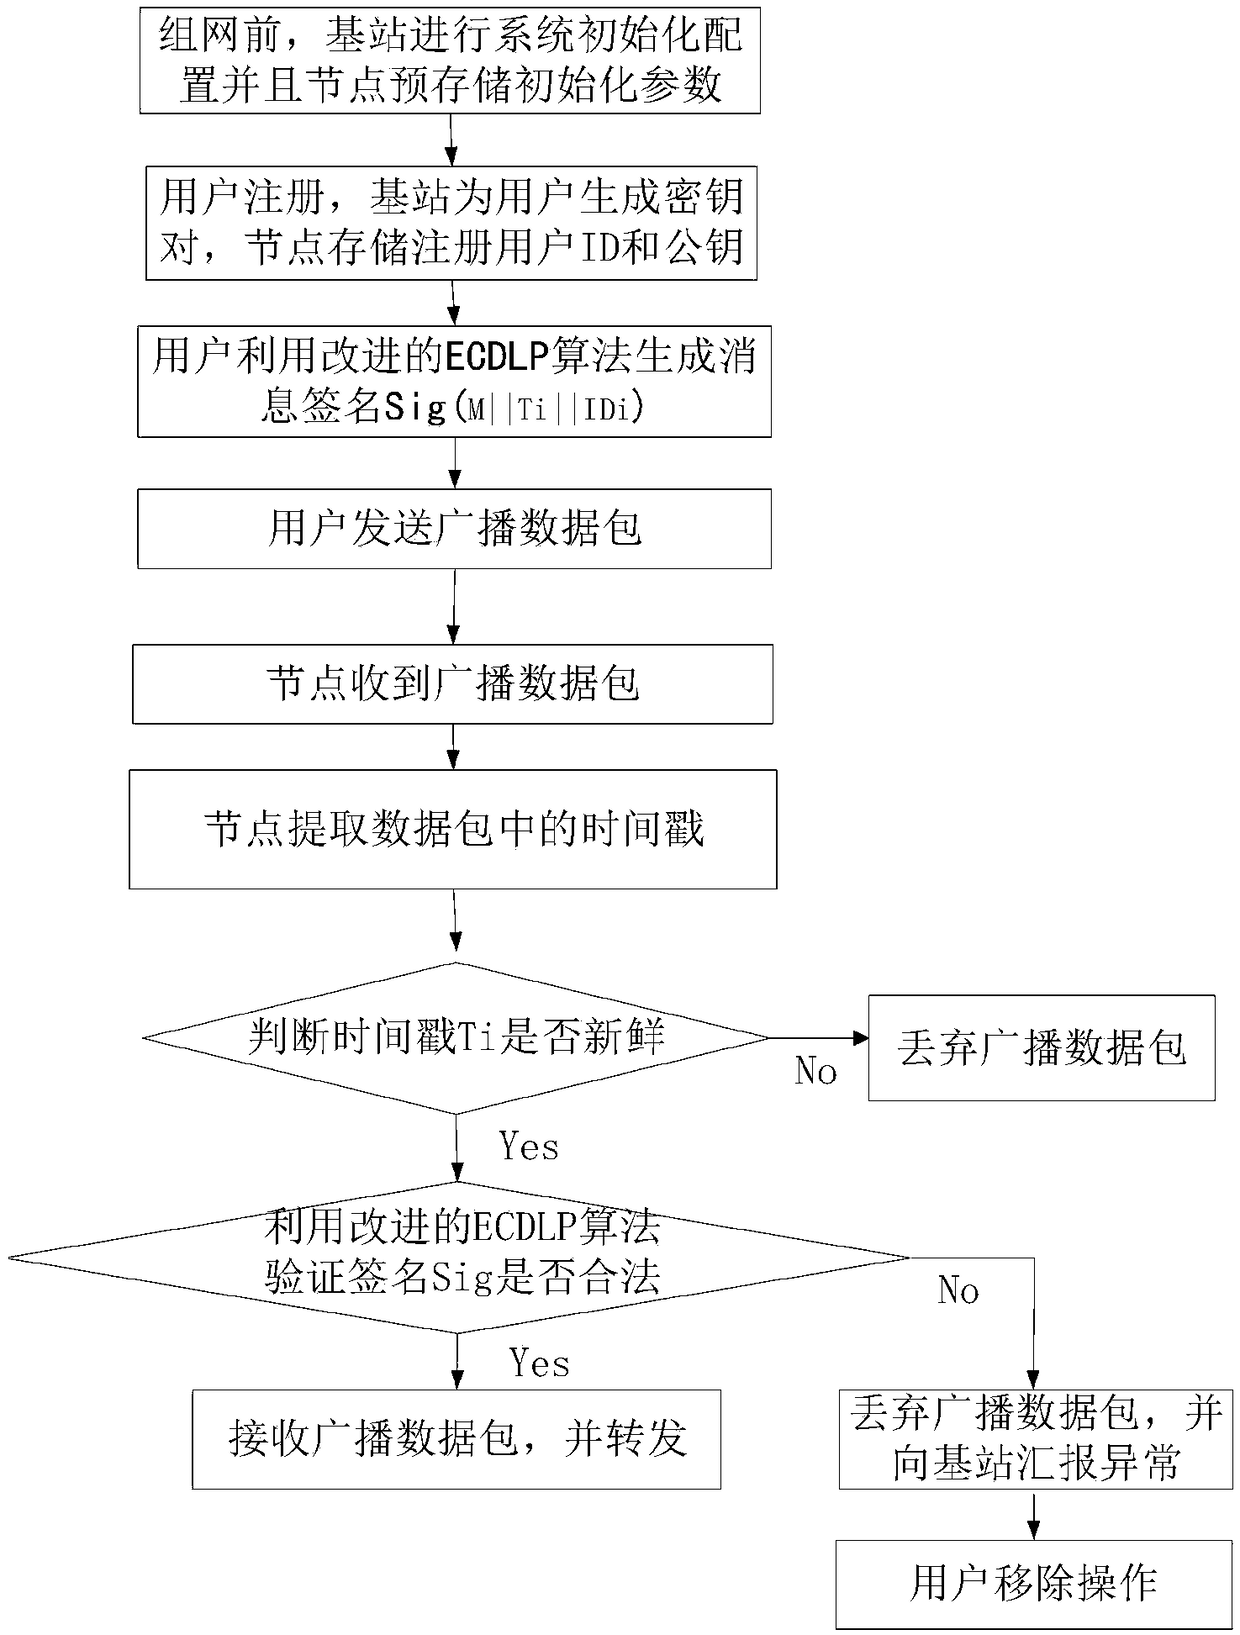 IPv6 industrial wireless network data security transmission method based on broadcast signcryption